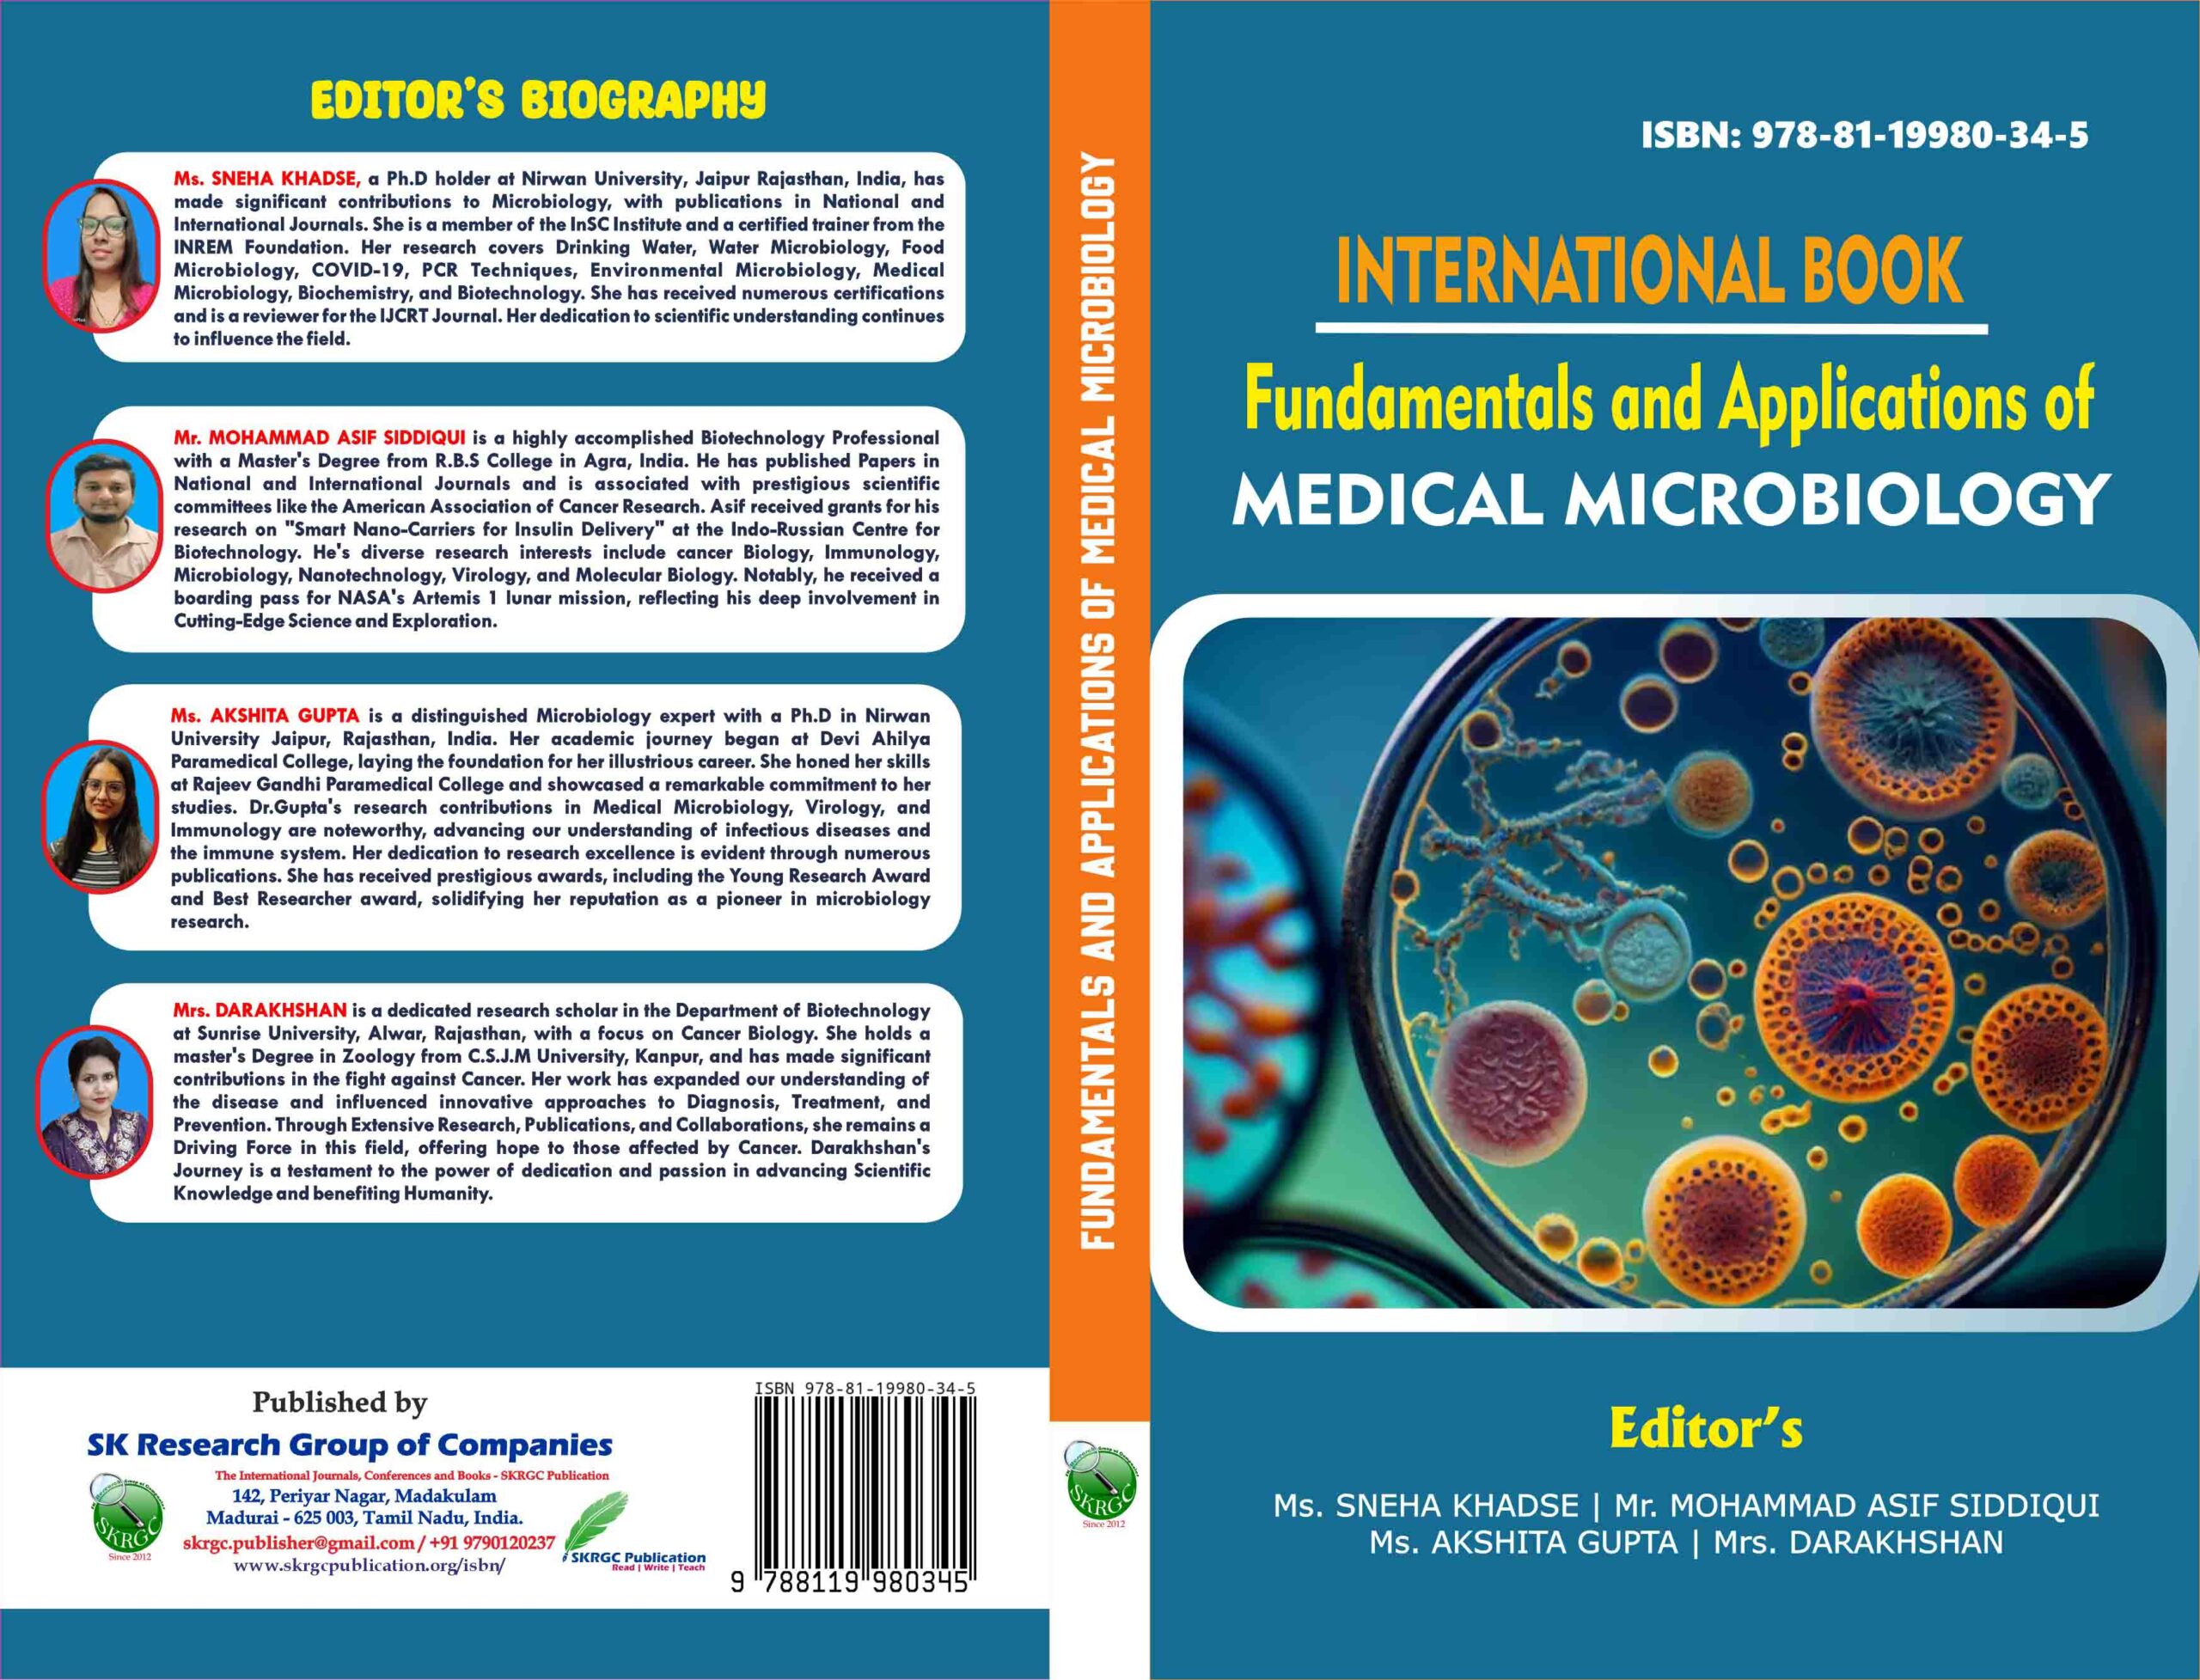 FUNDAMENTALS AND APPLICATIONS OF MEDICAL MICROBIOLOGY